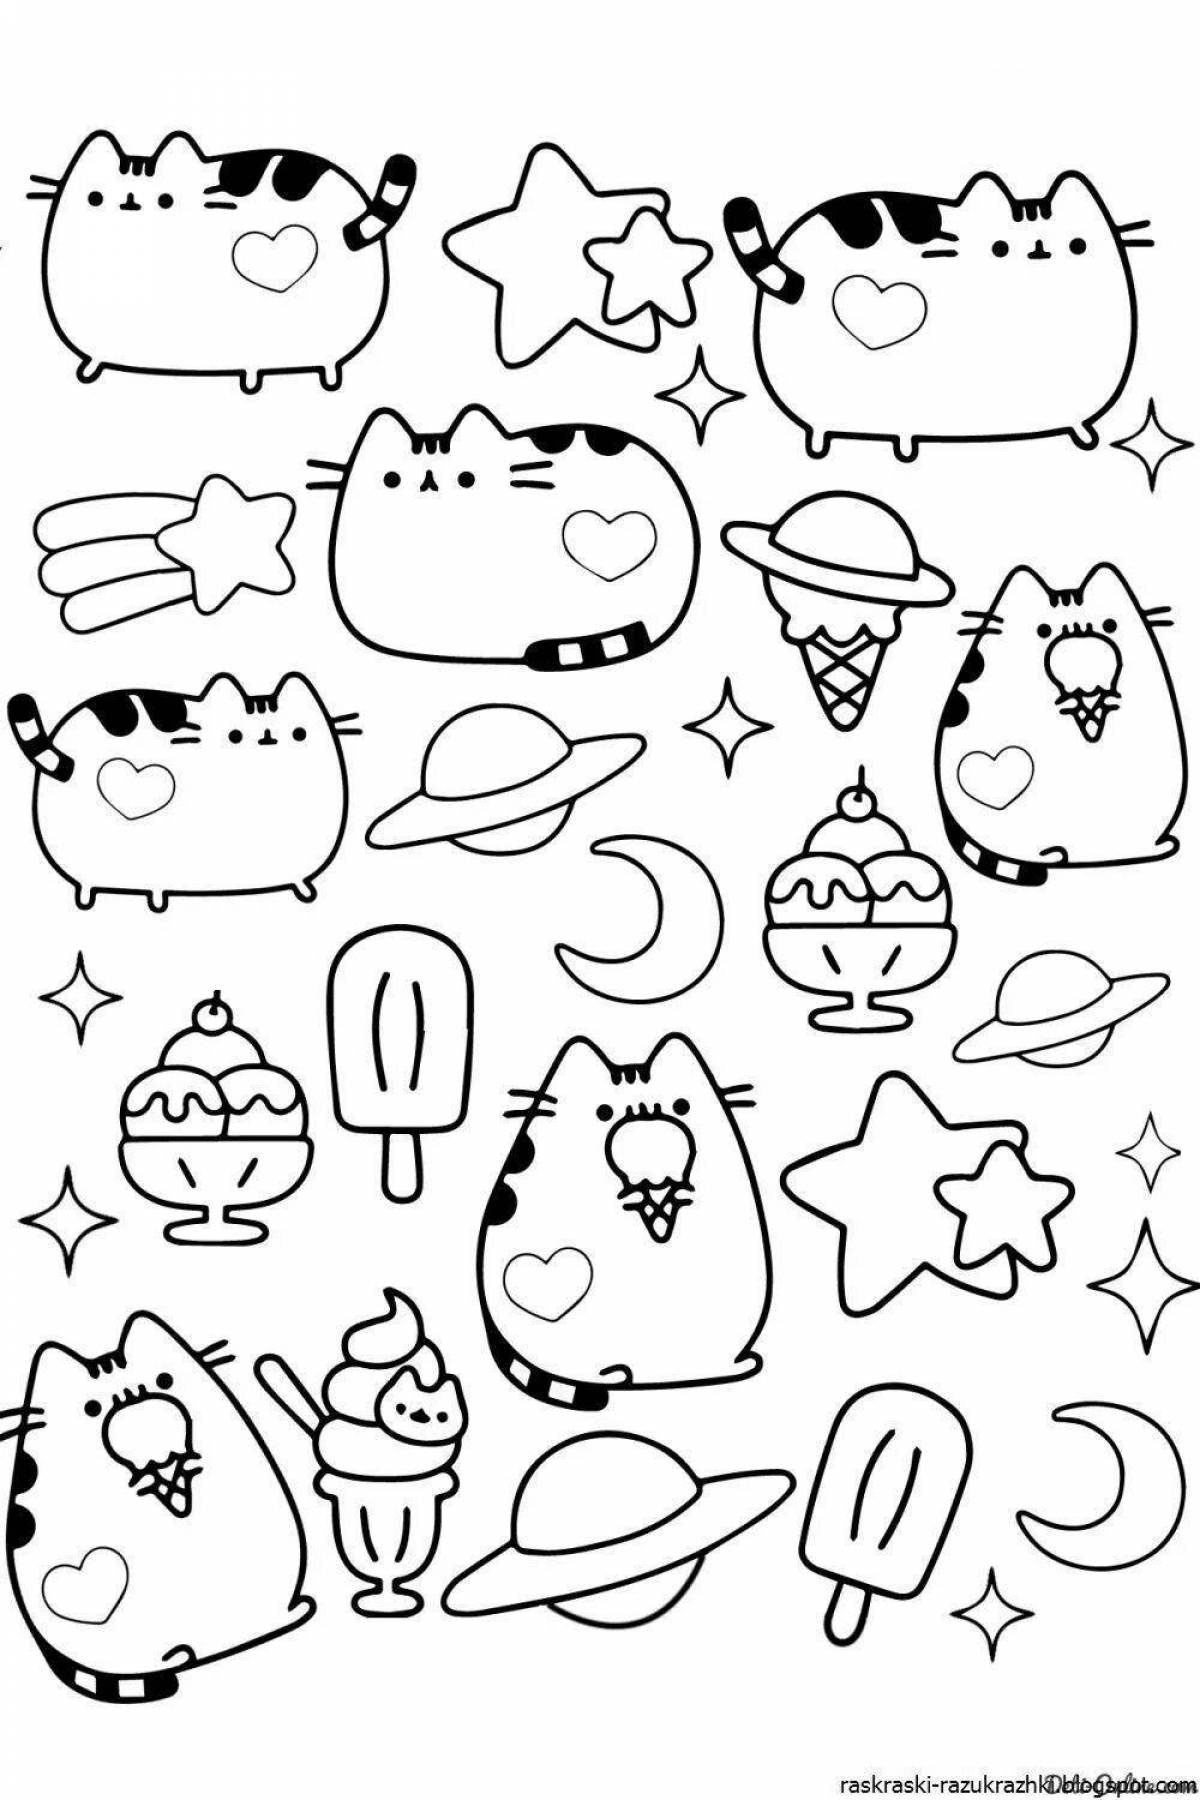 Cats small for stickers #6